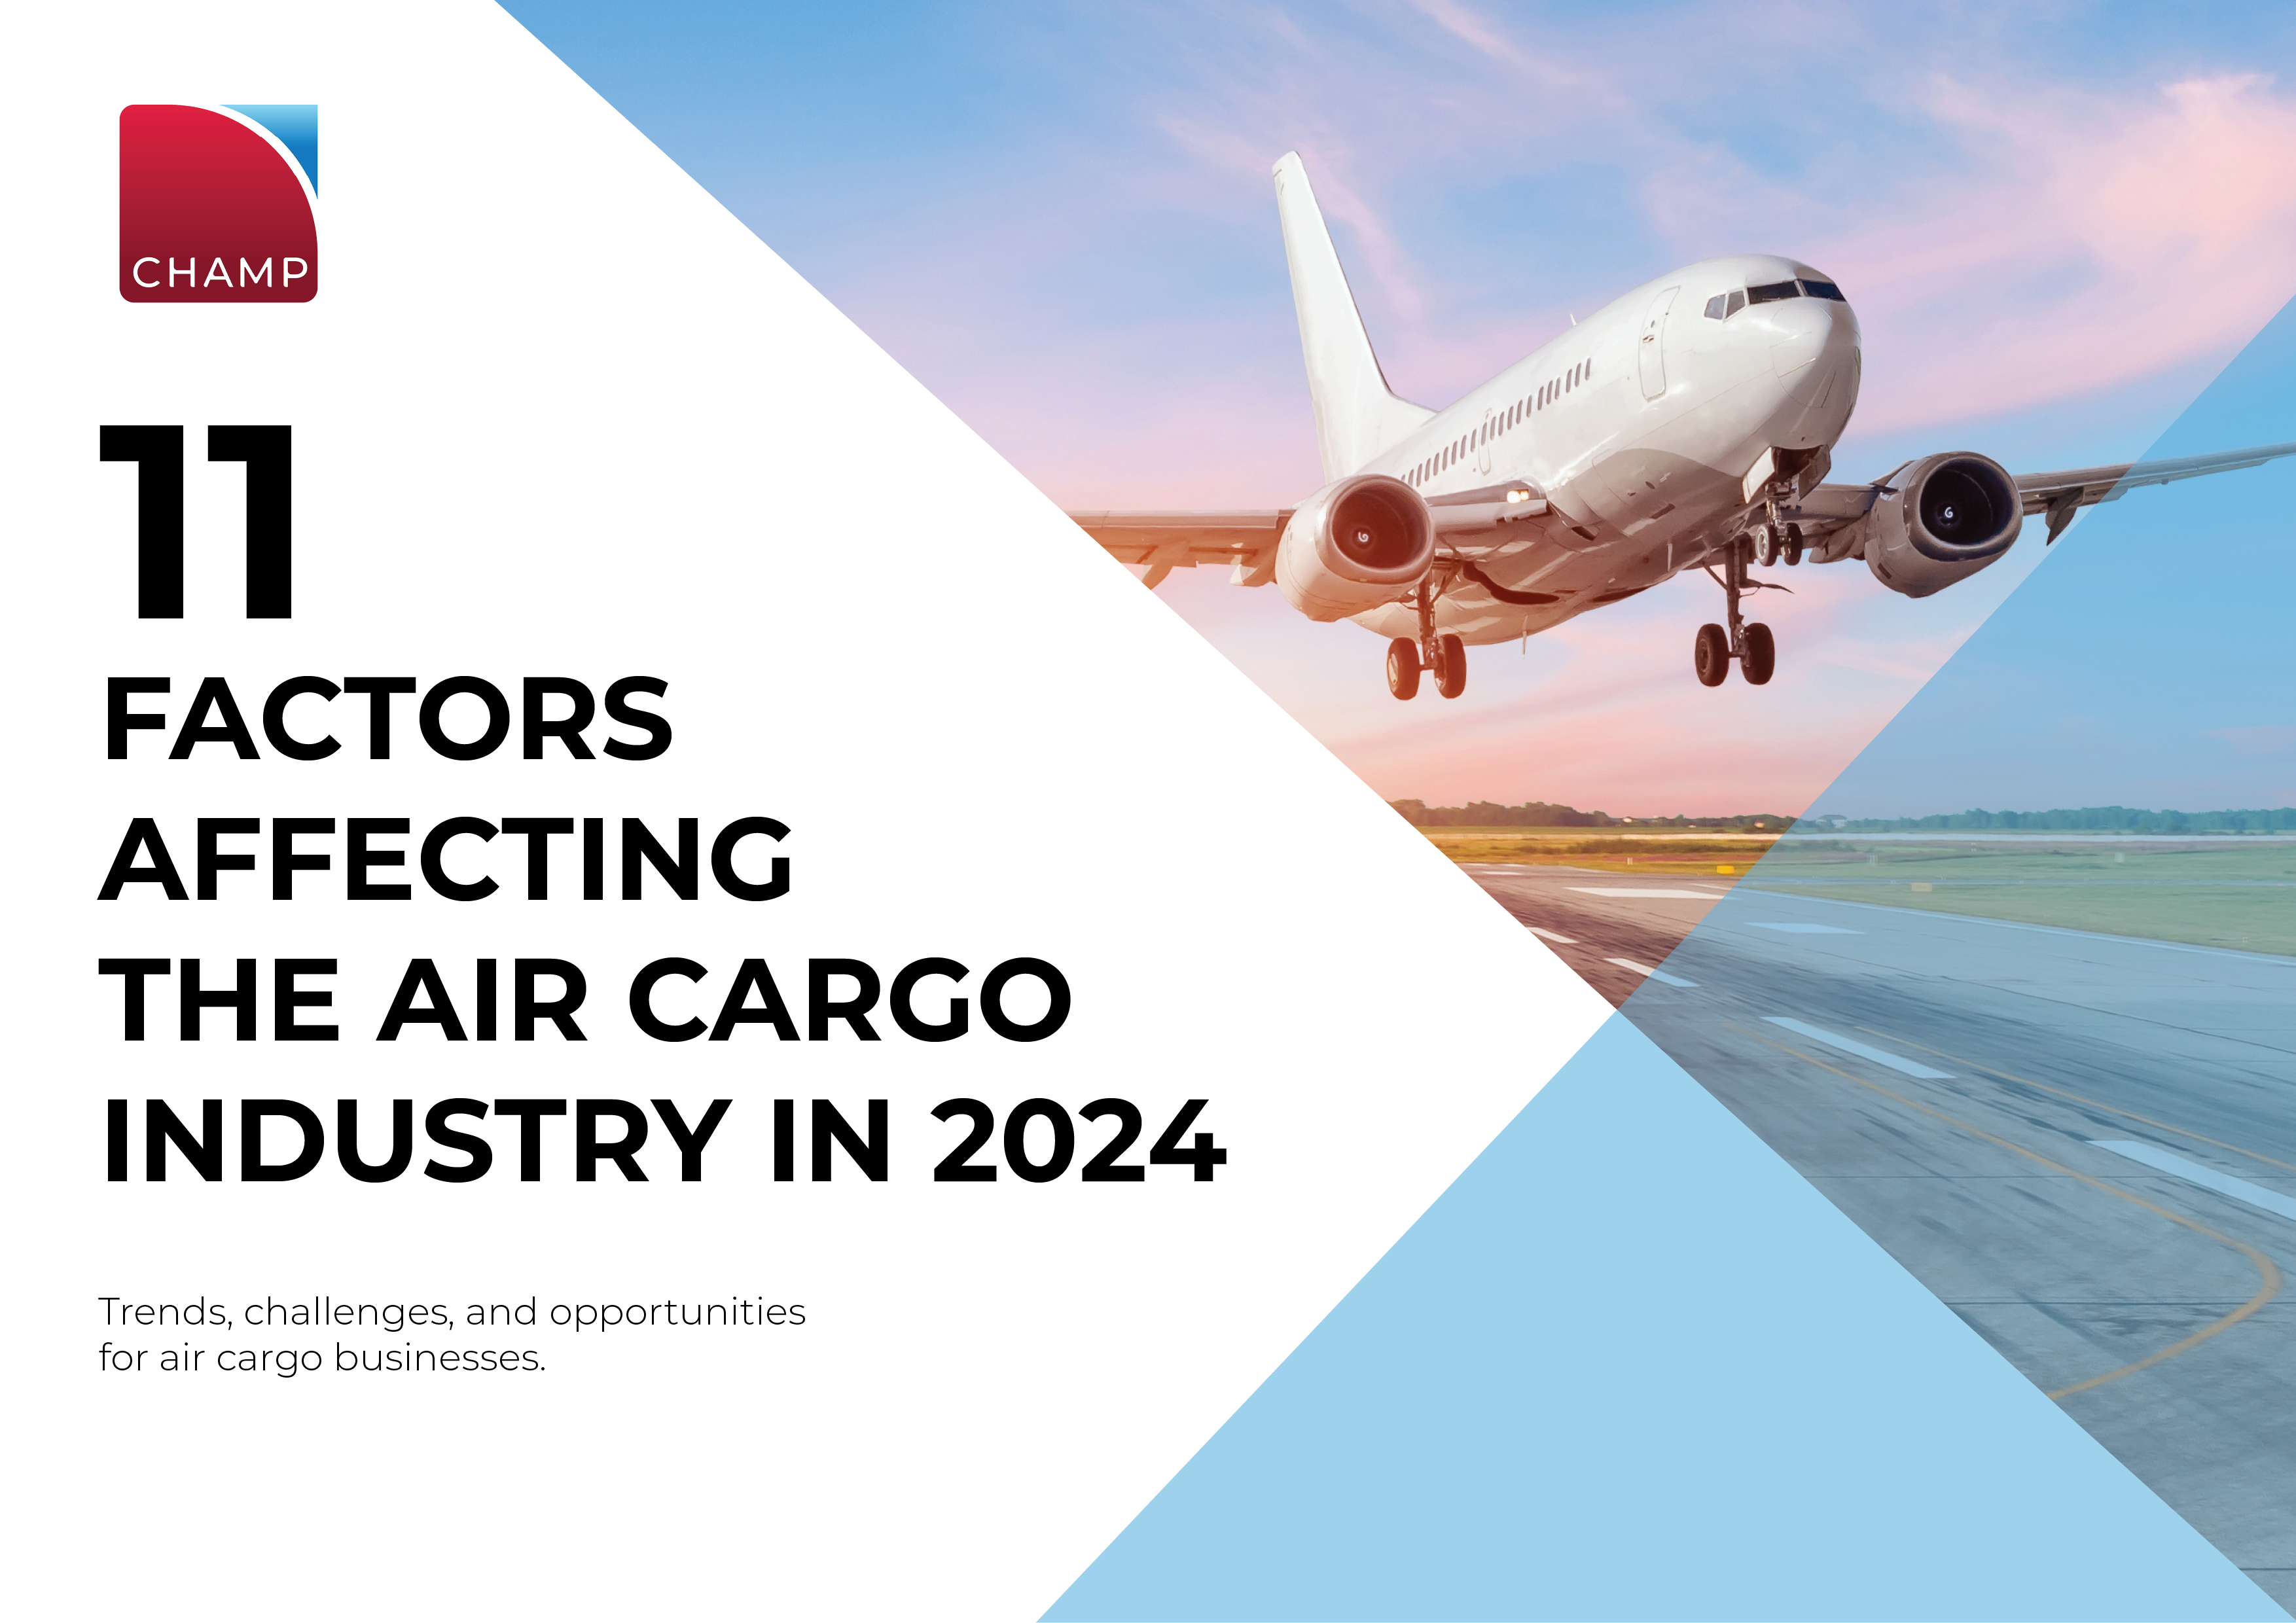 REPORT: 11 Factors Affecting the Air Cargo Industry in 2024